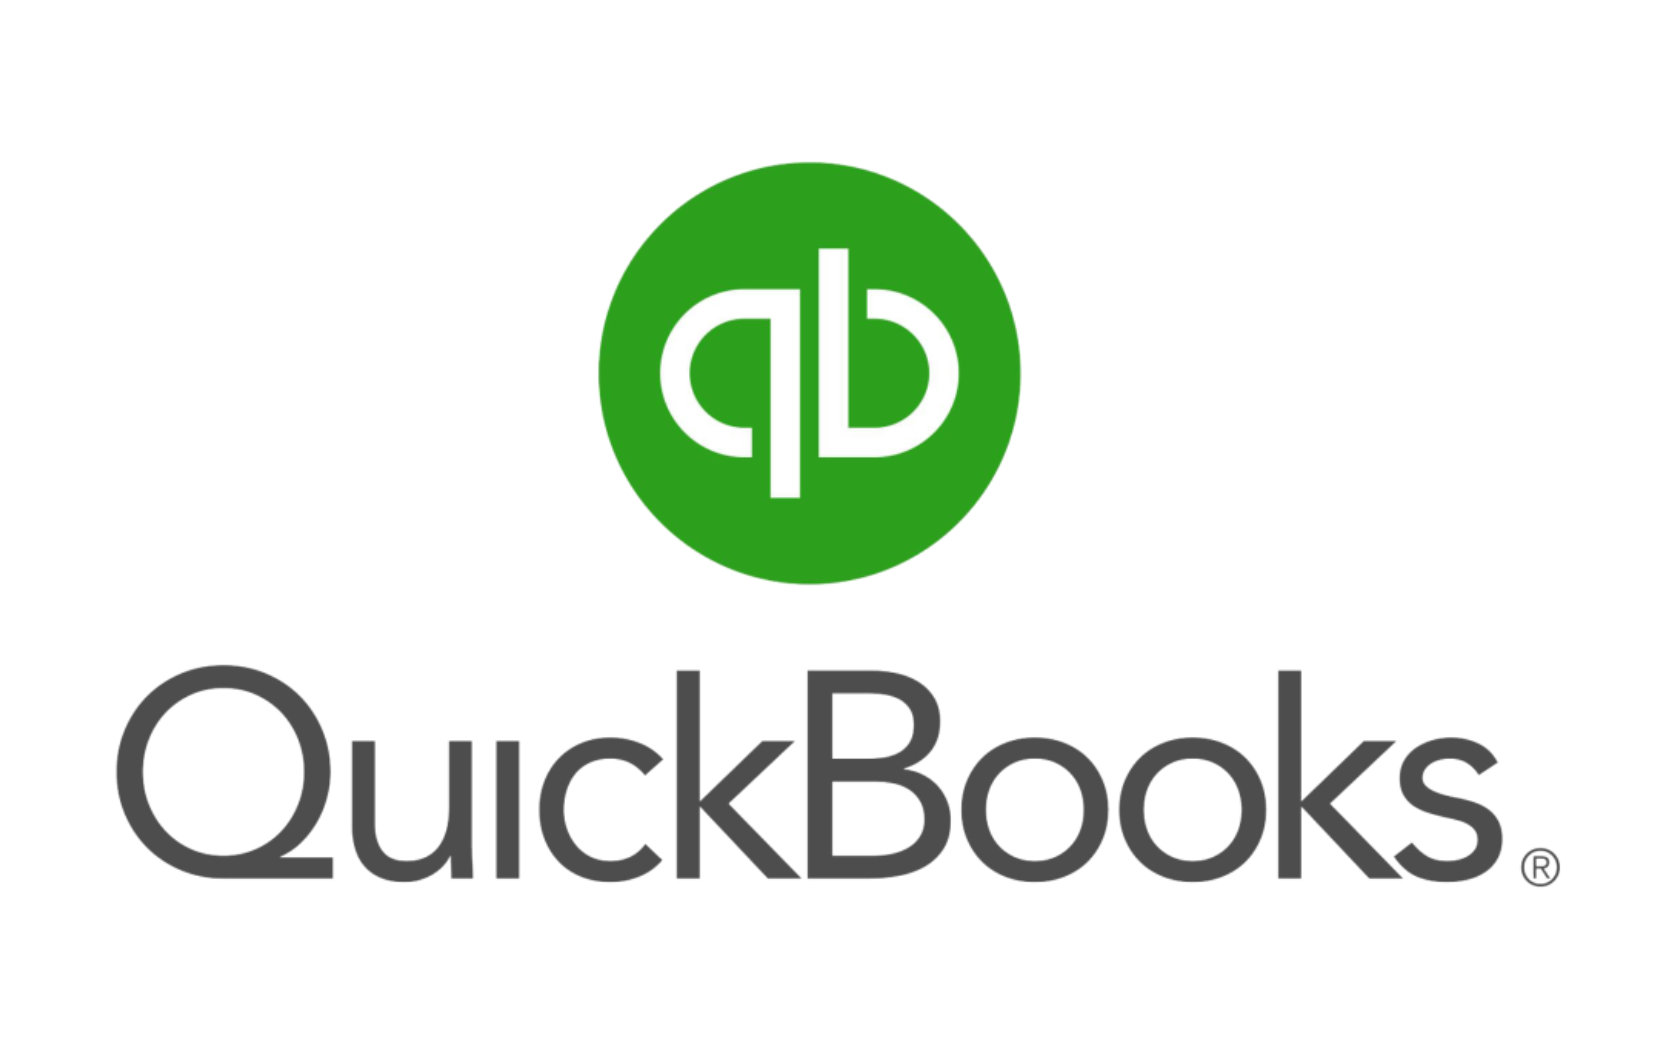 QuickBooks keeps closing: What to do and how to fix it?